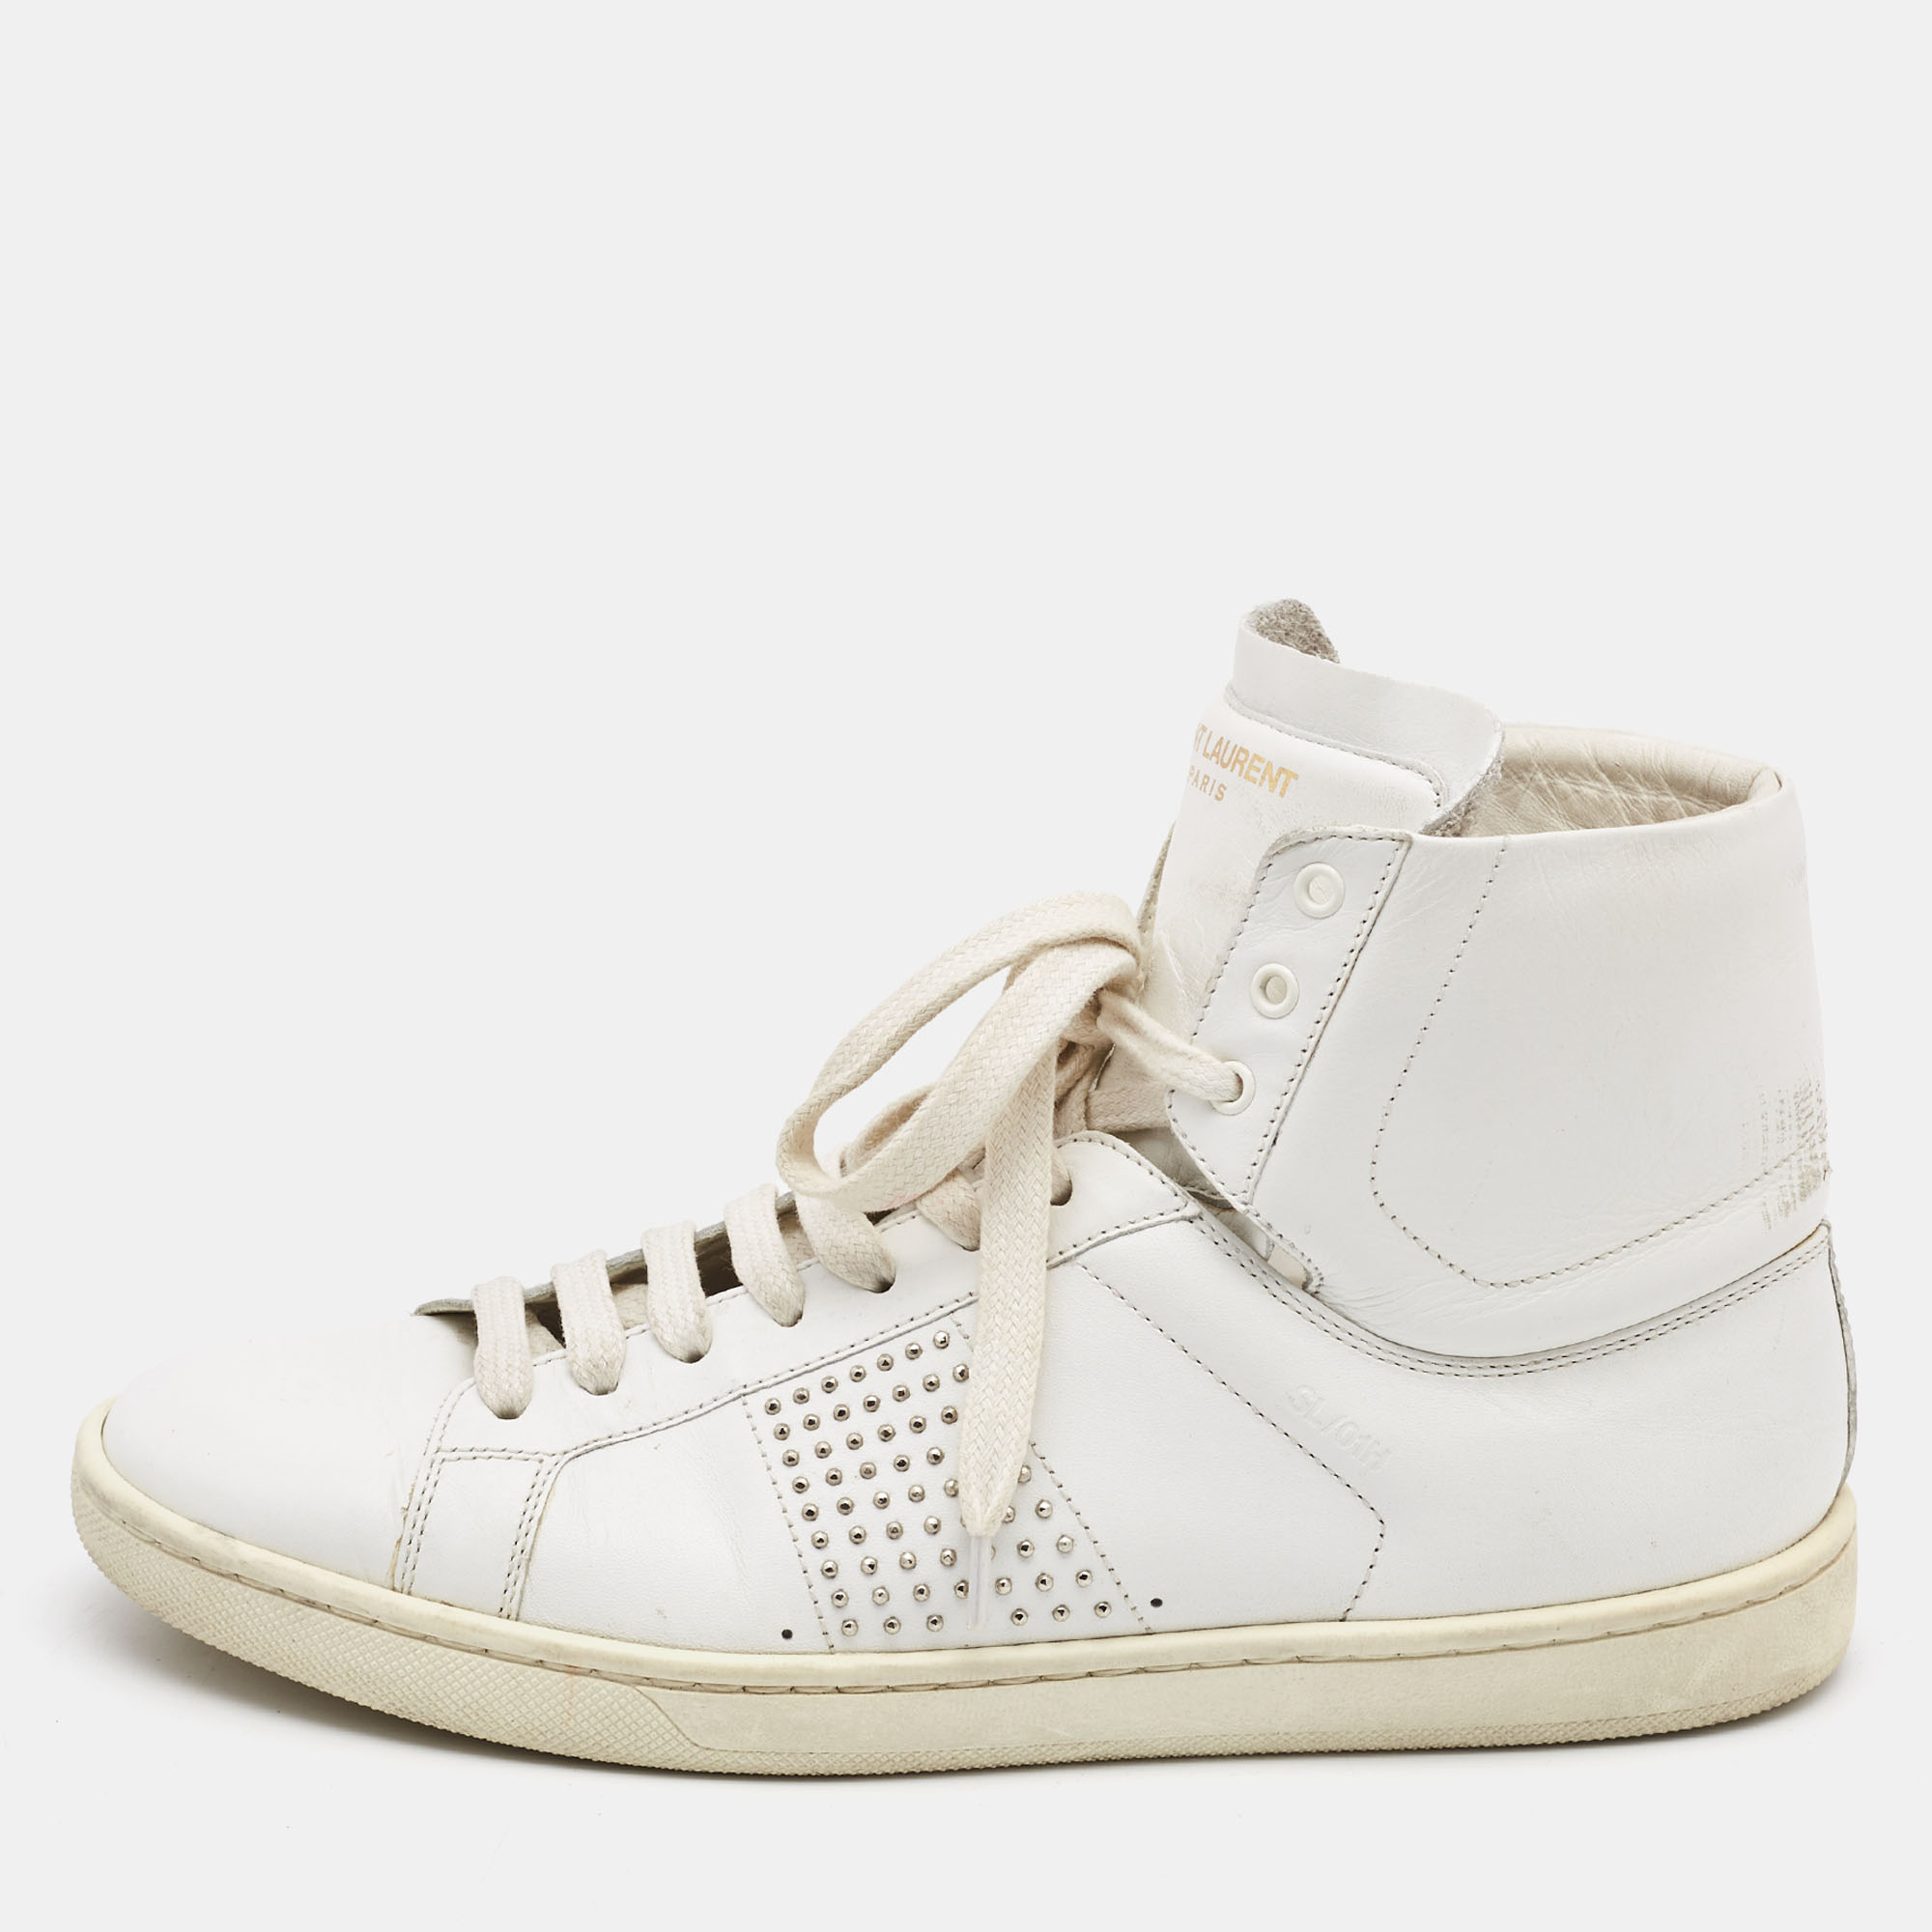 Pre-owned Saint Laurent White Leather Studded High Top Sneakers Size 37